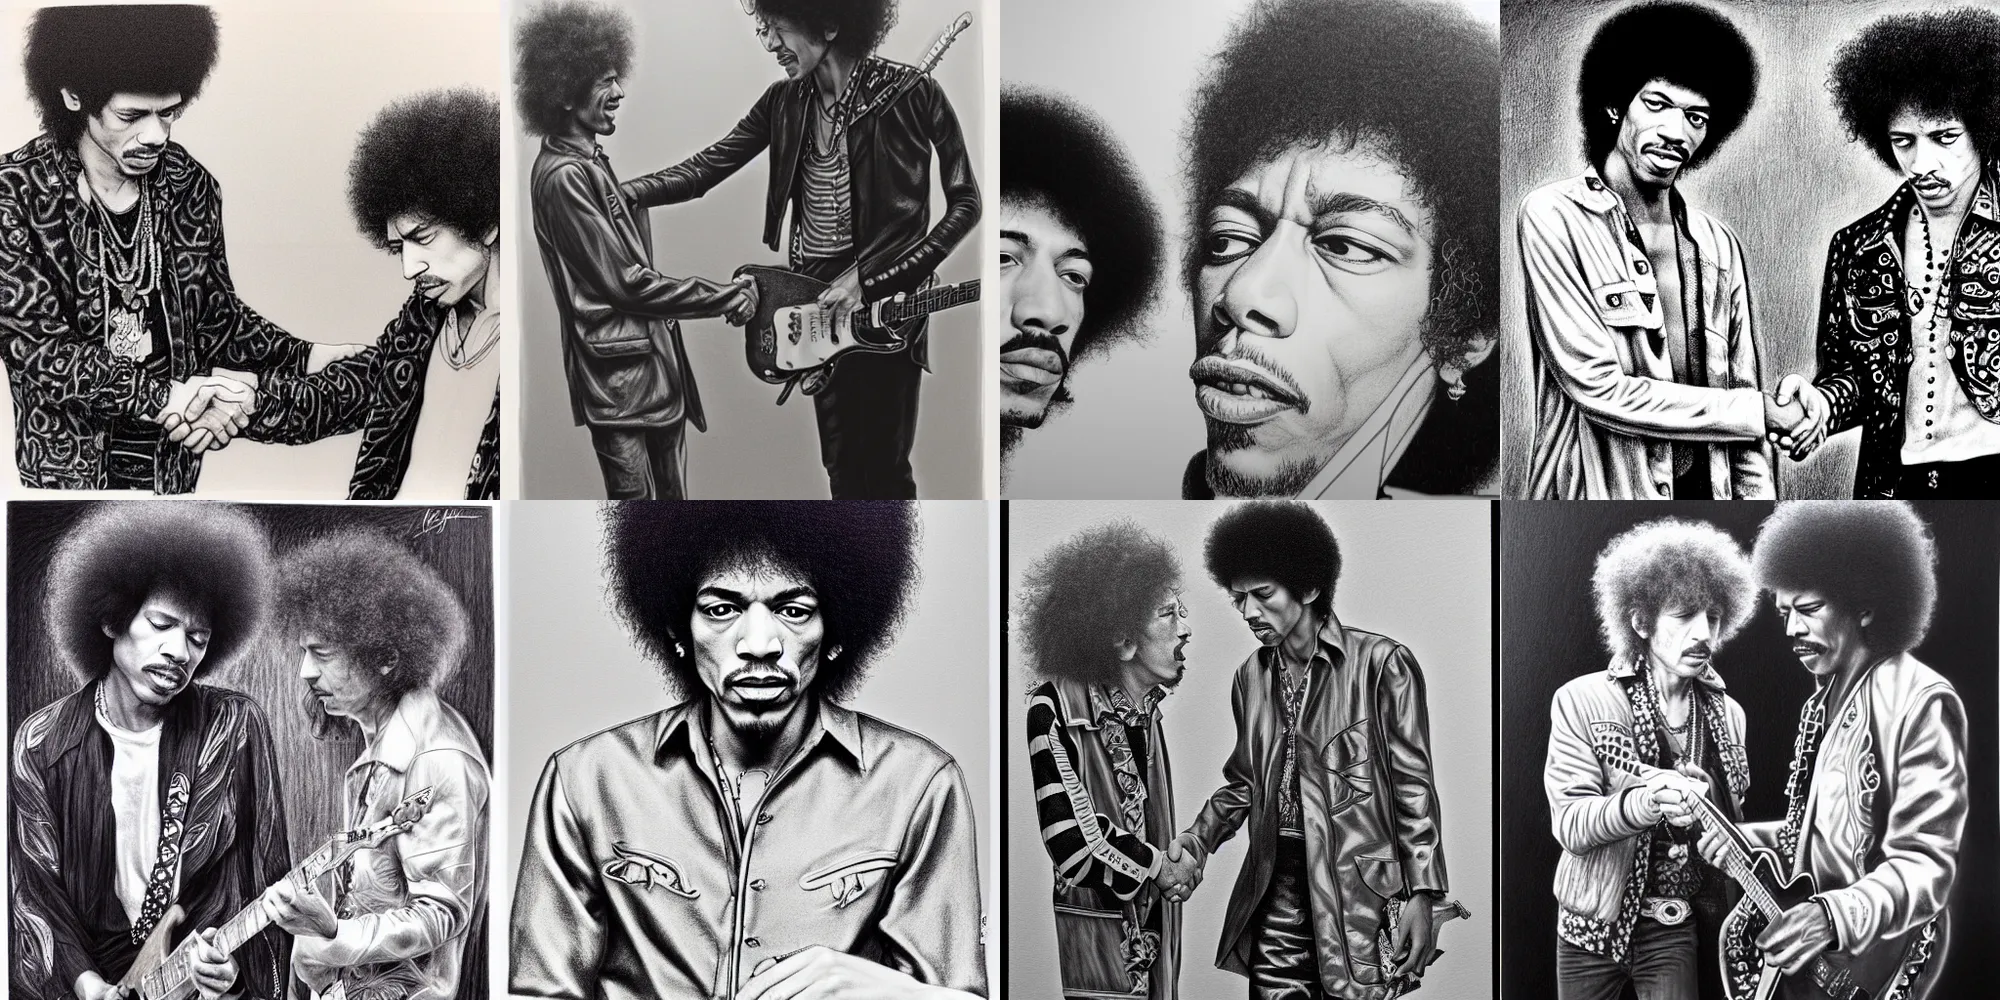 Prompt: Graphite Pencil Drawing, intricately detailed of Jimi Hendrix shaking hands with Bob Dylan by Laurie Lipton